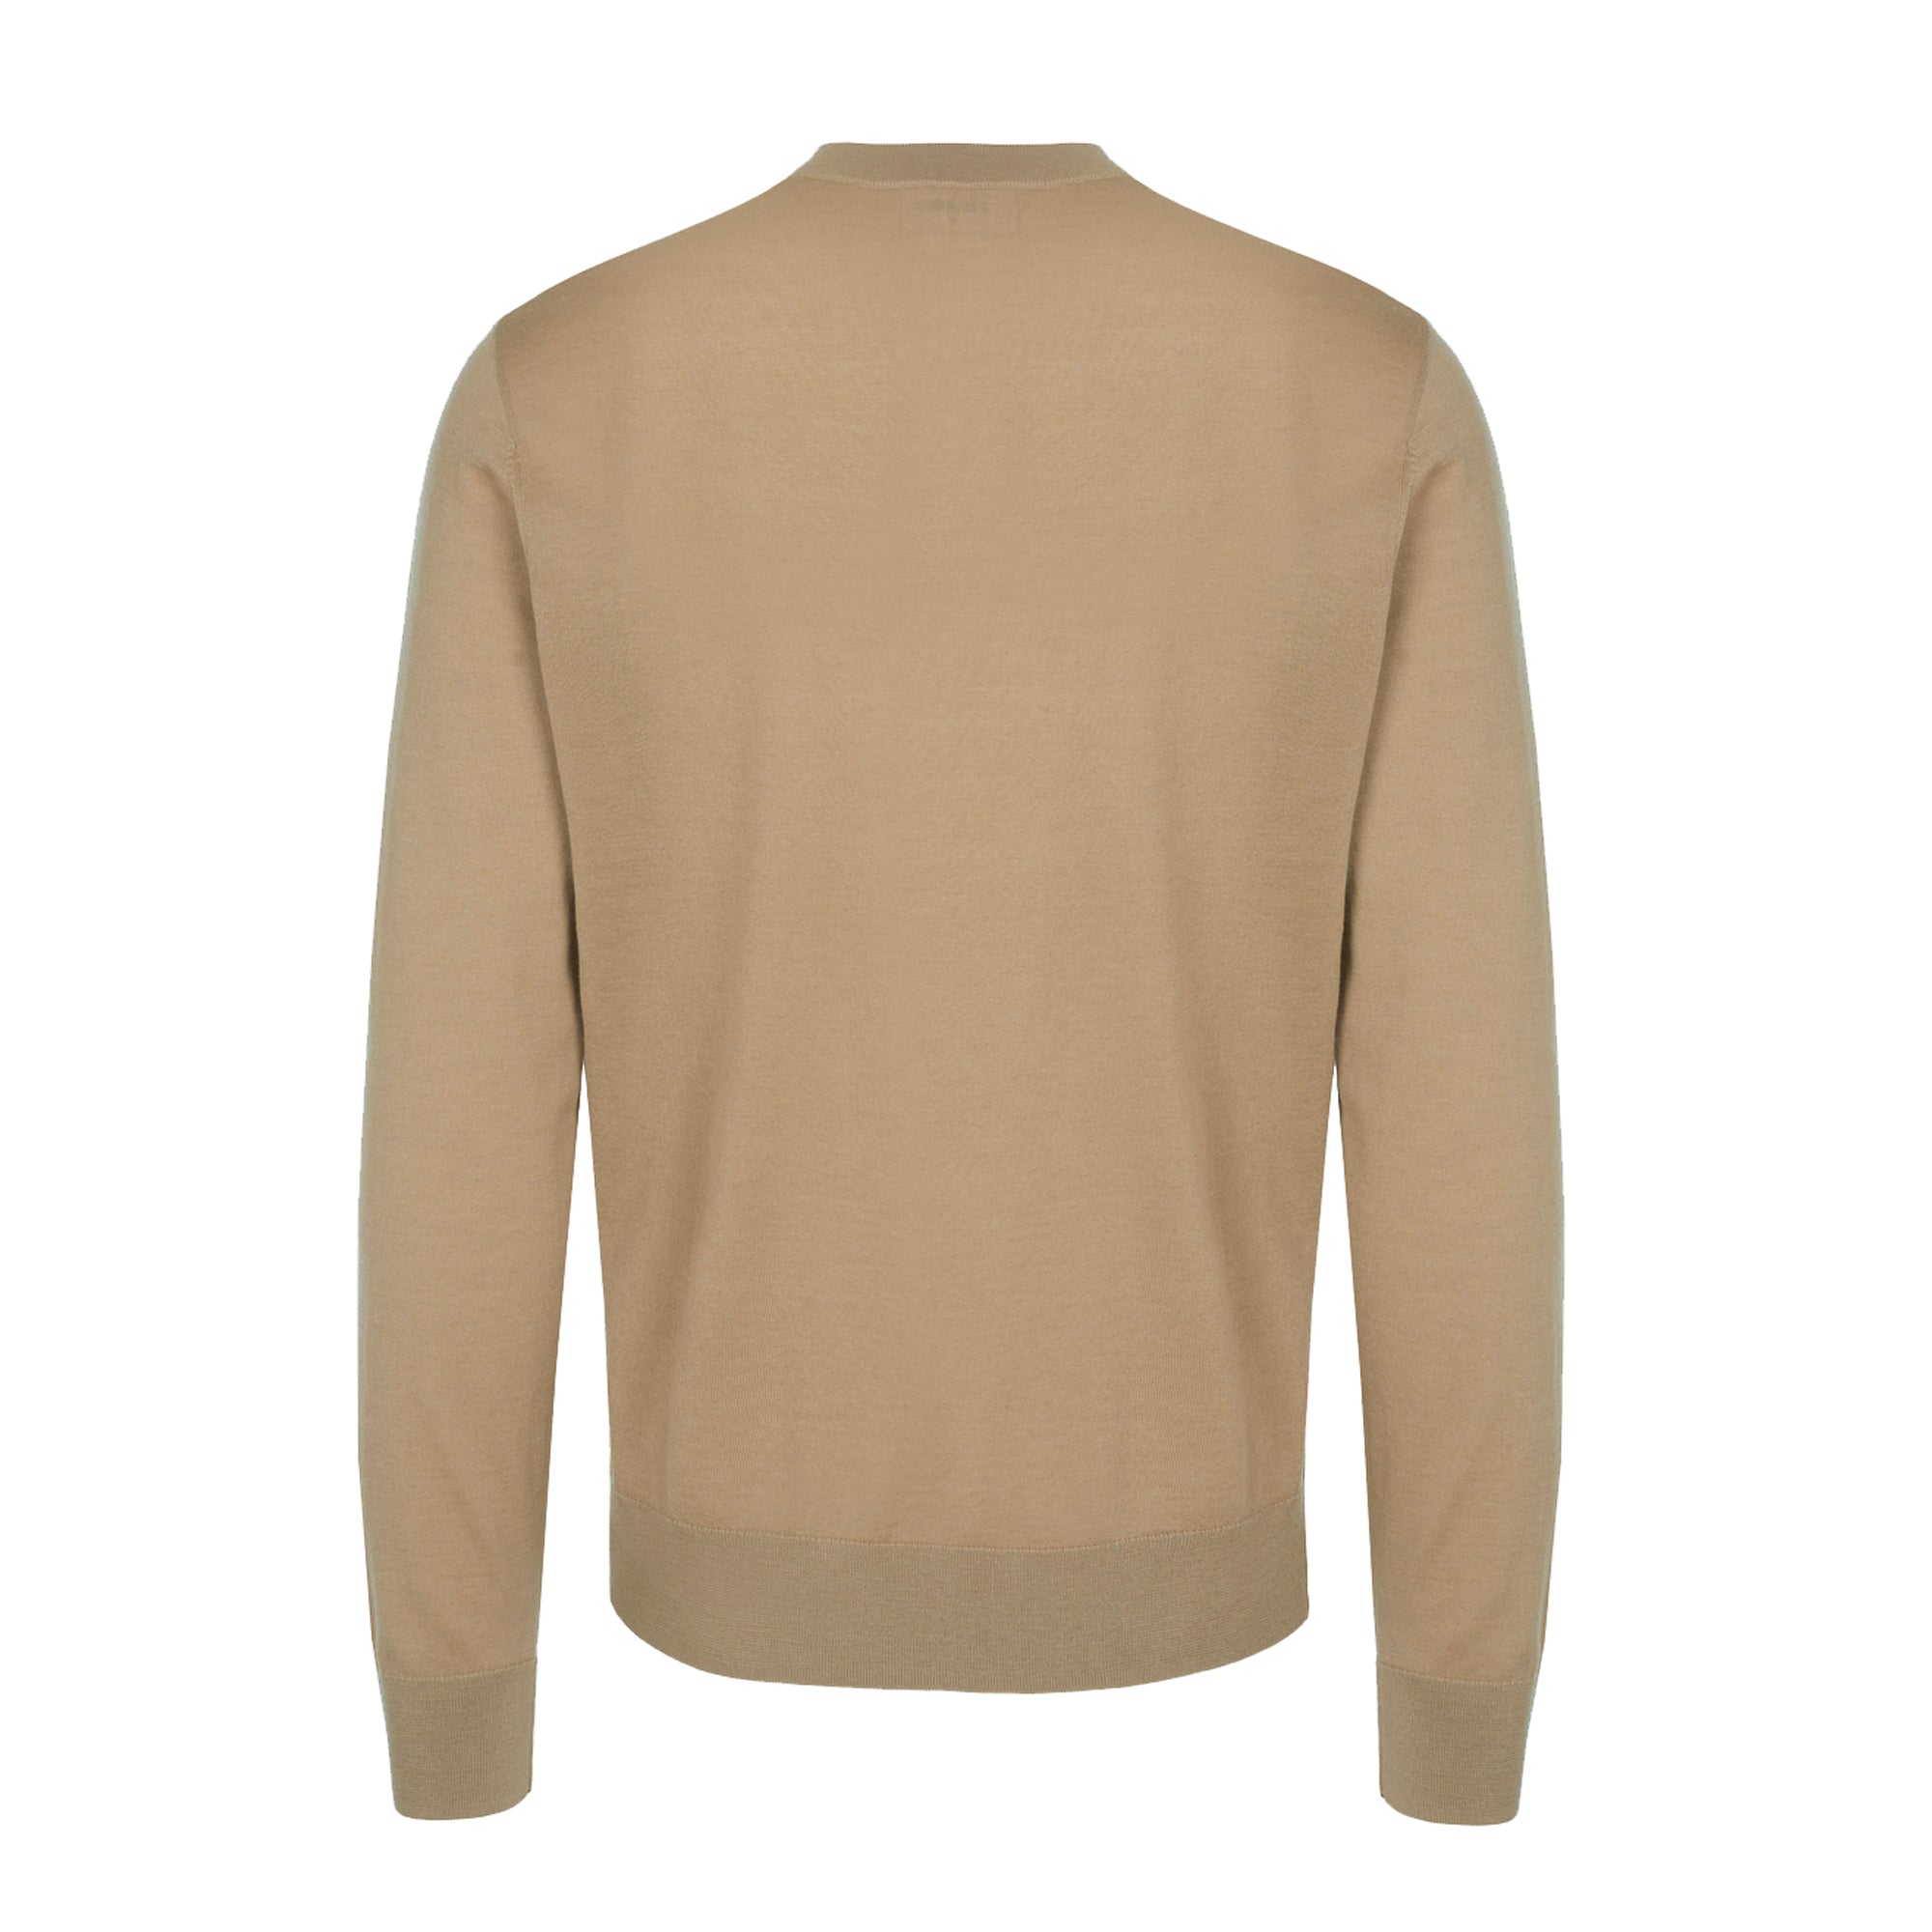 Dsquared2 Mens Neon Roundneck Knit Sweater Beige M